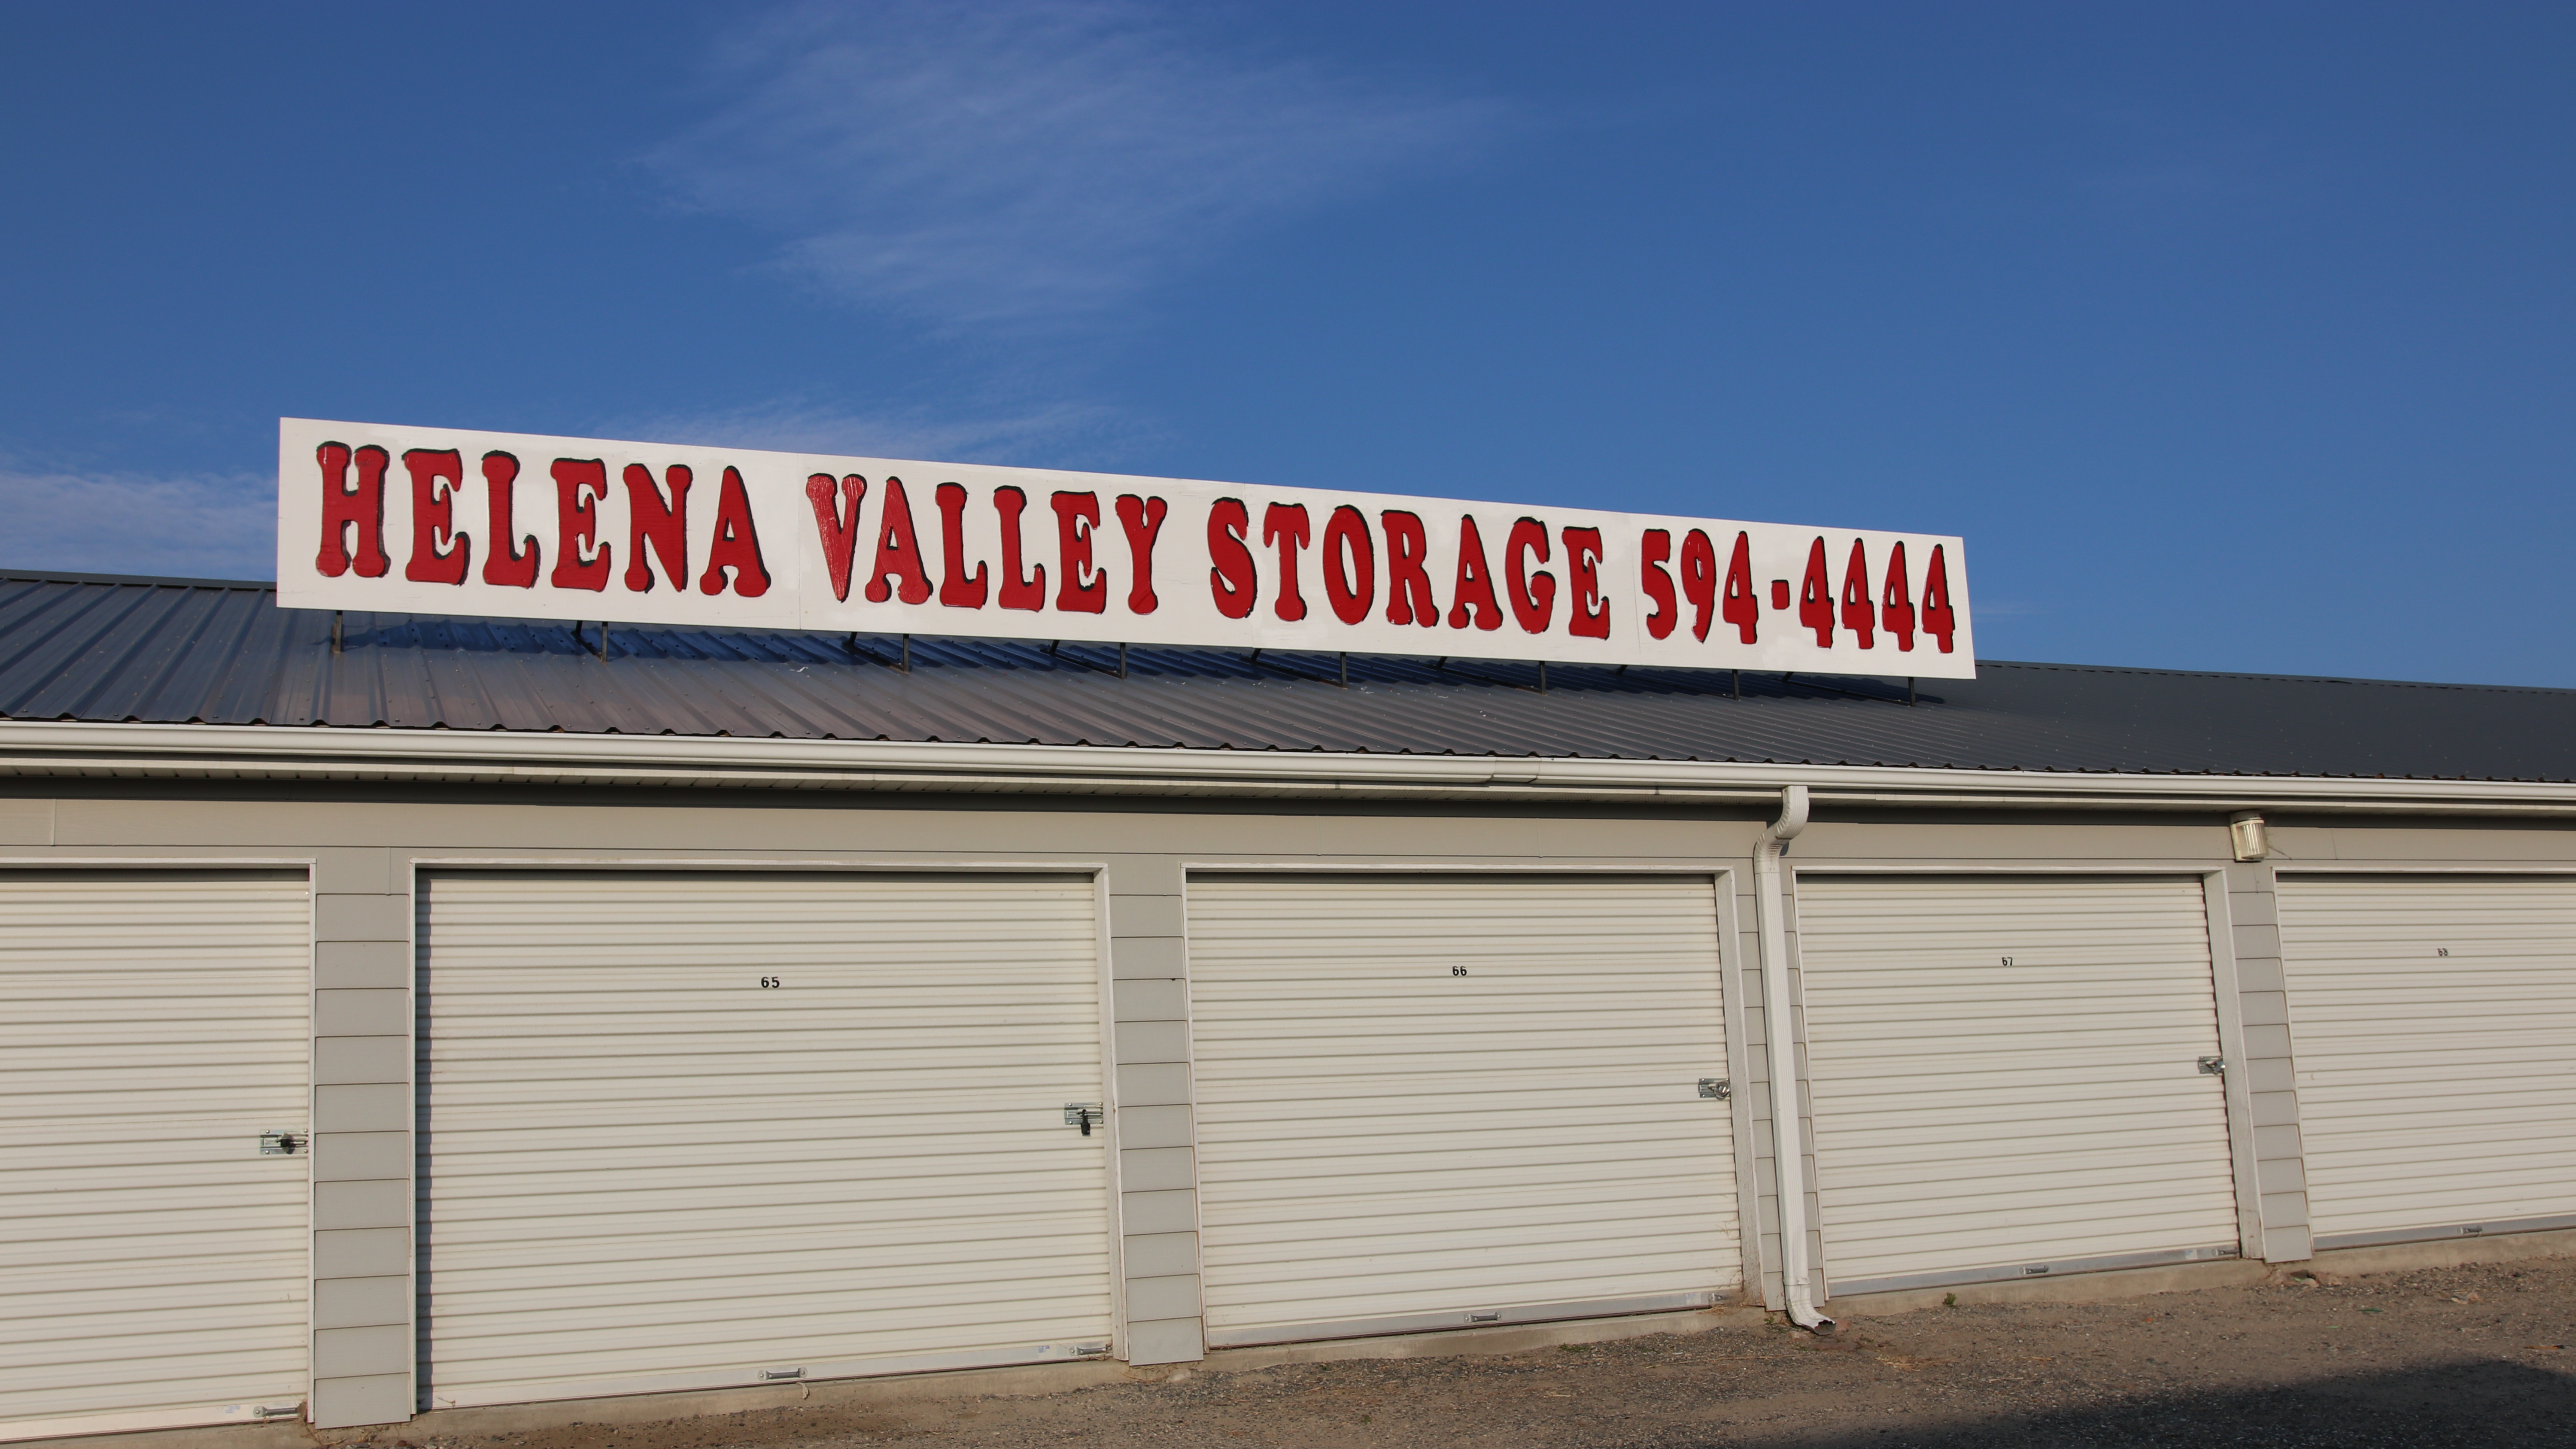 Helena Valley Storage Sign and Storage Building